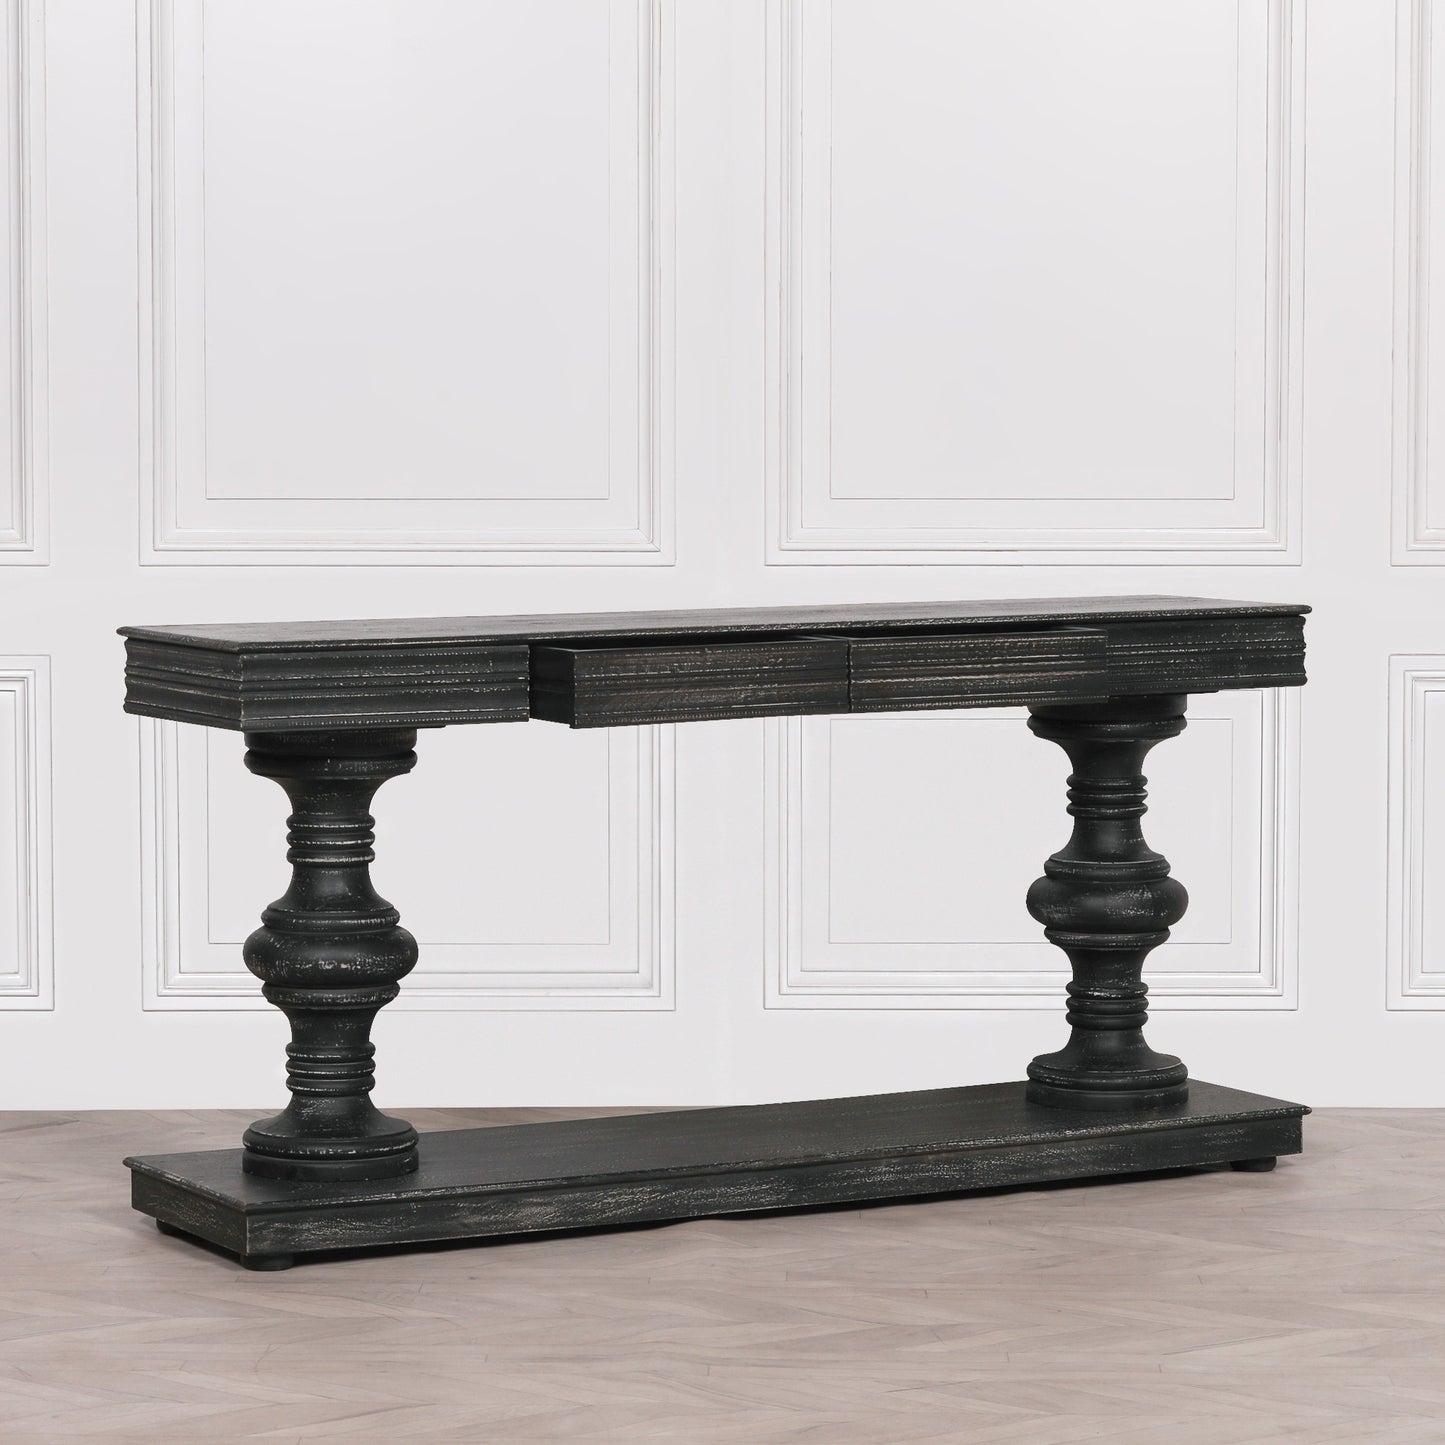 180cm Black Distressed Console Table with Drawers CasaFenix